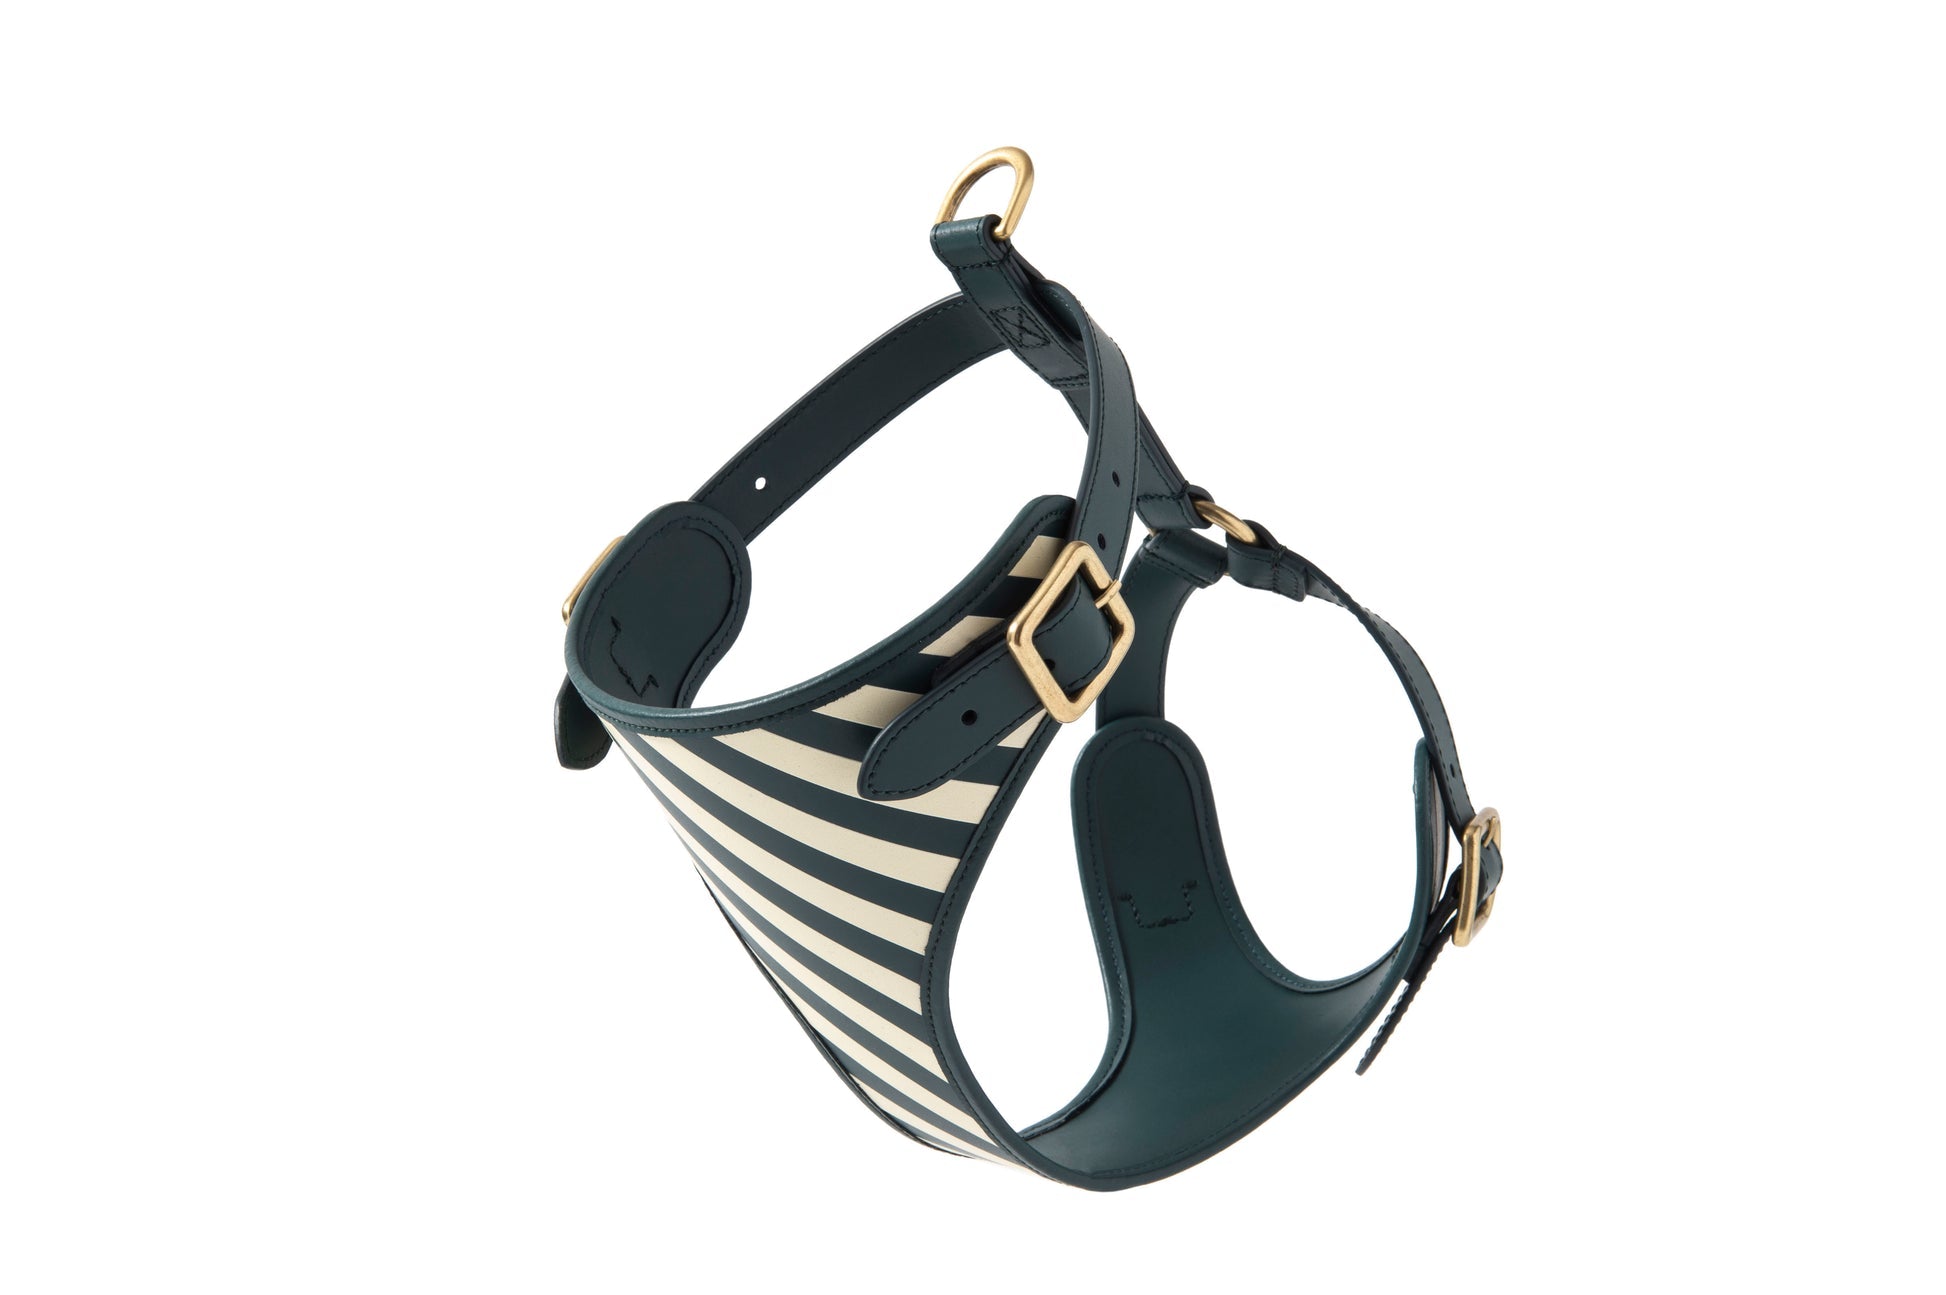 STRIPED COLLAR by POLDO DOG COUTURE – Petsaporter